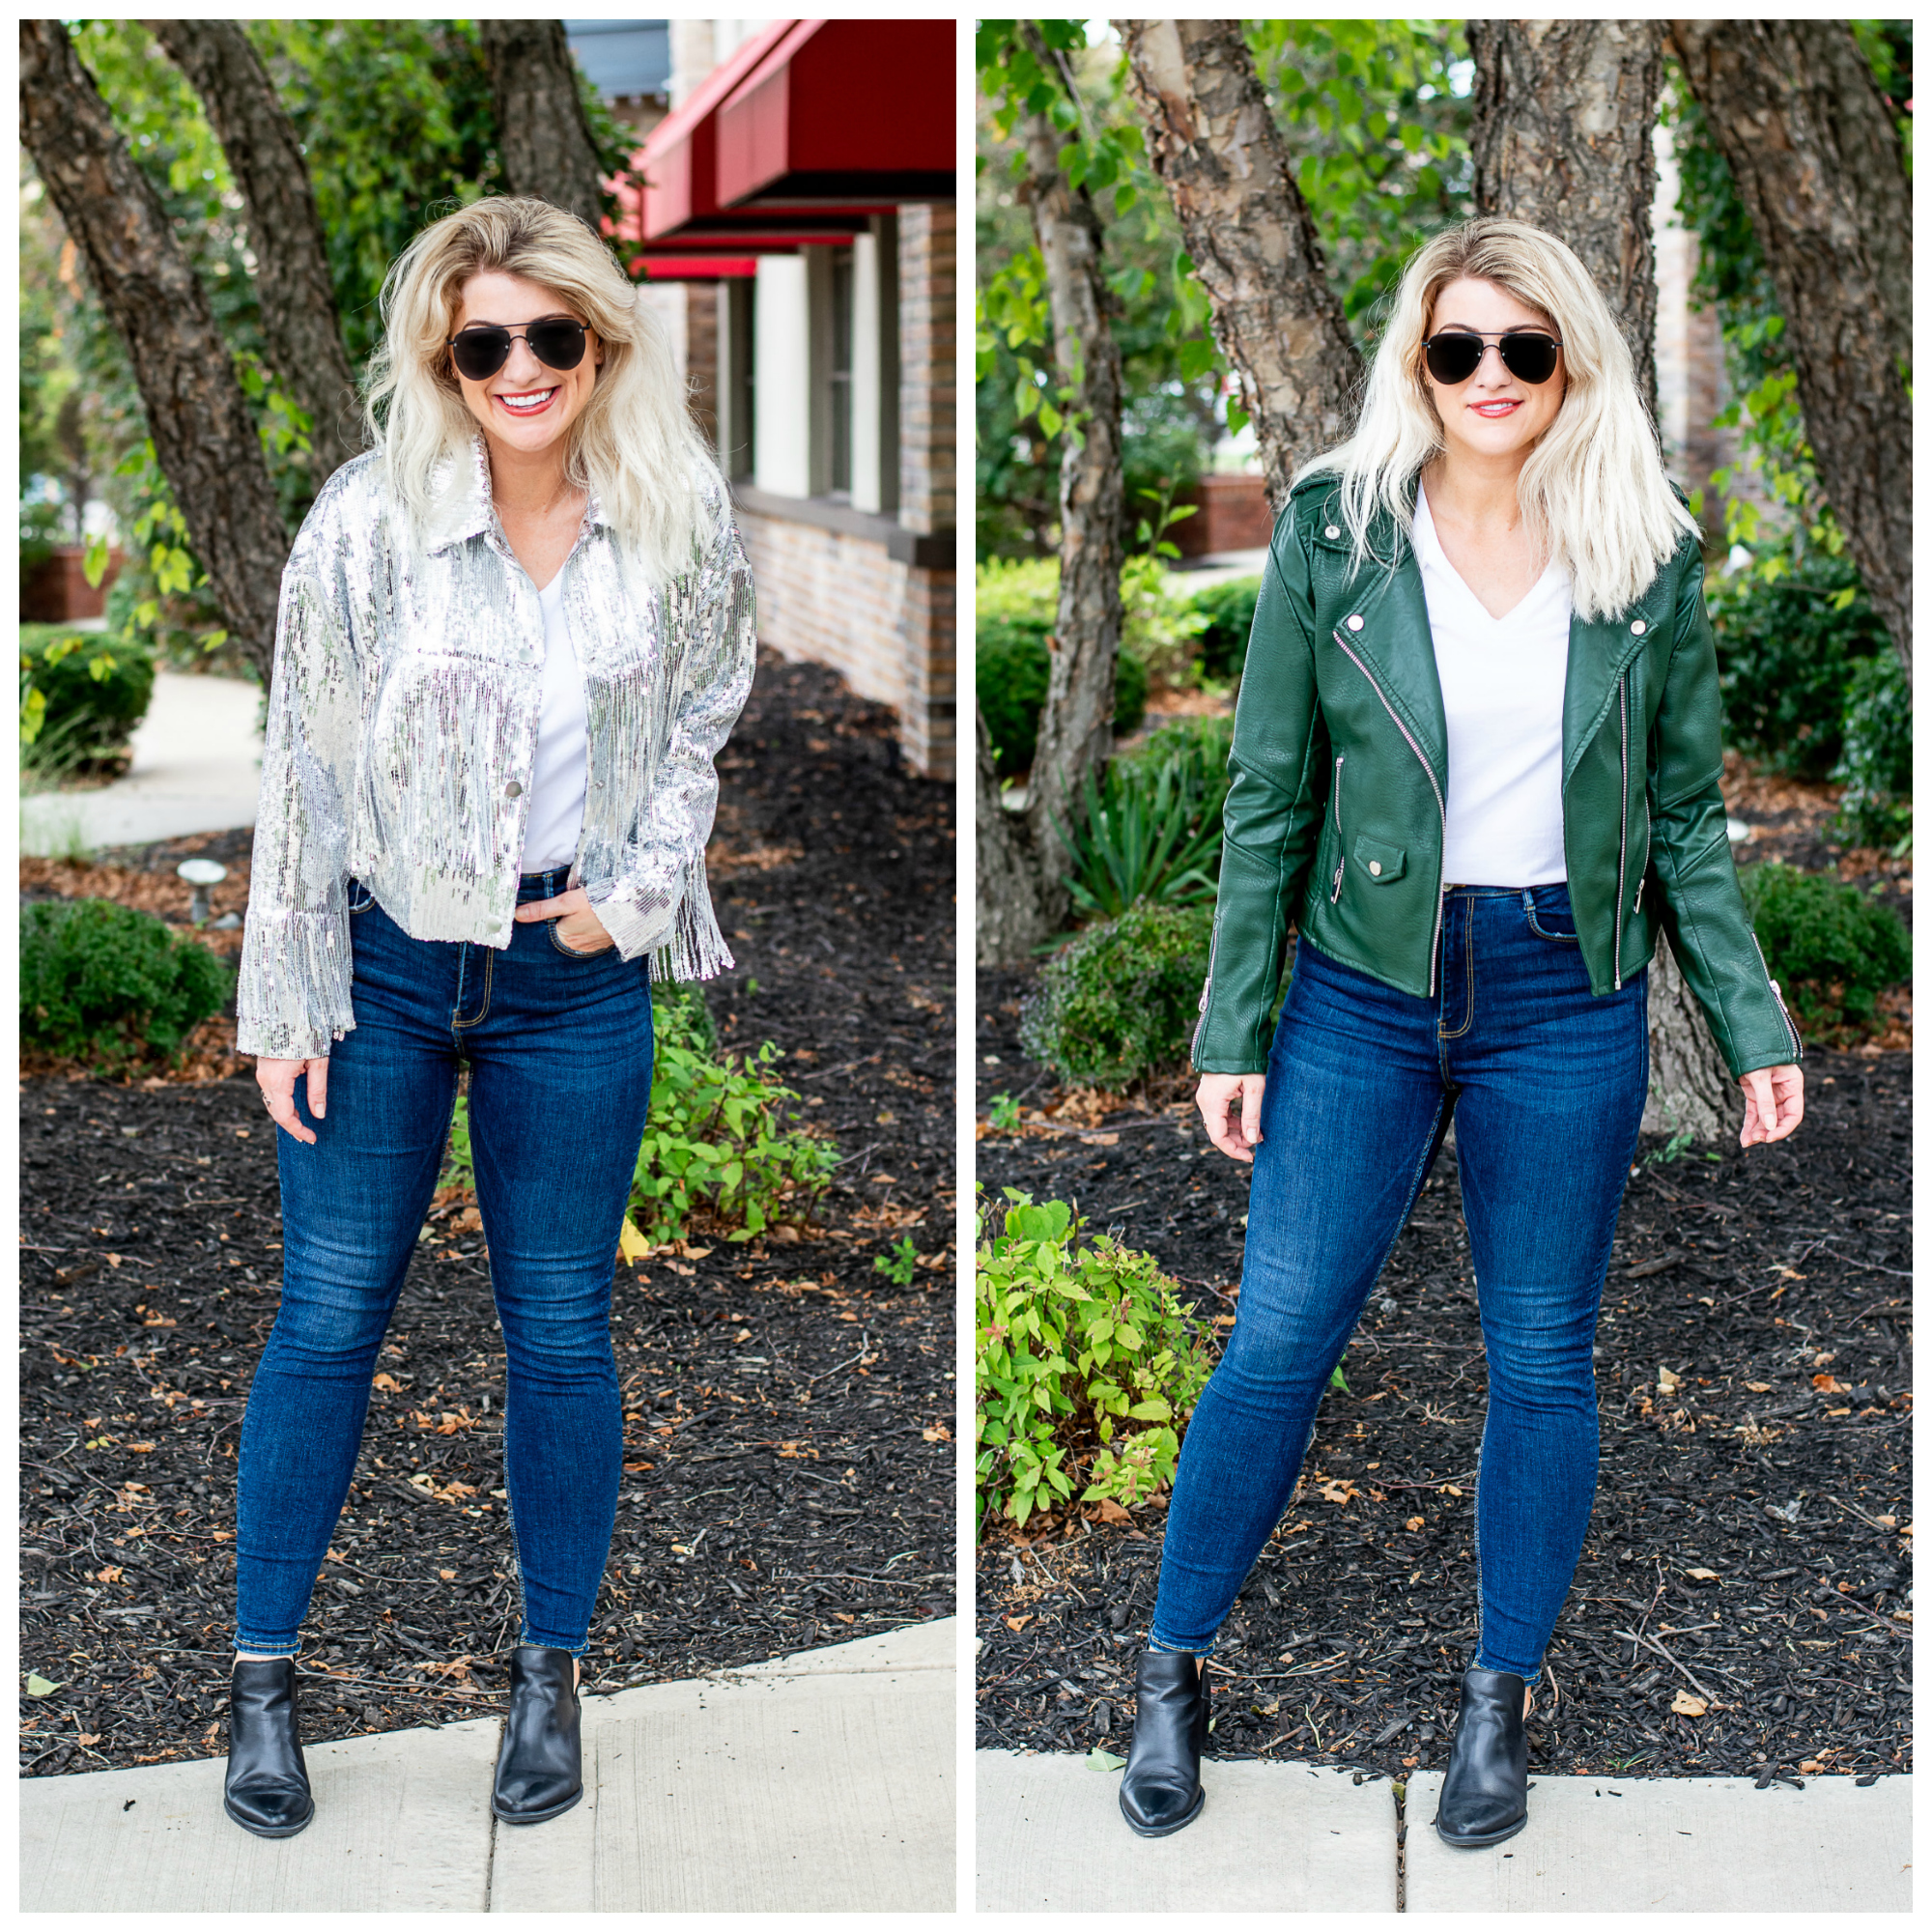 Change Your Fall Look with a Statement Jacket. | LSR